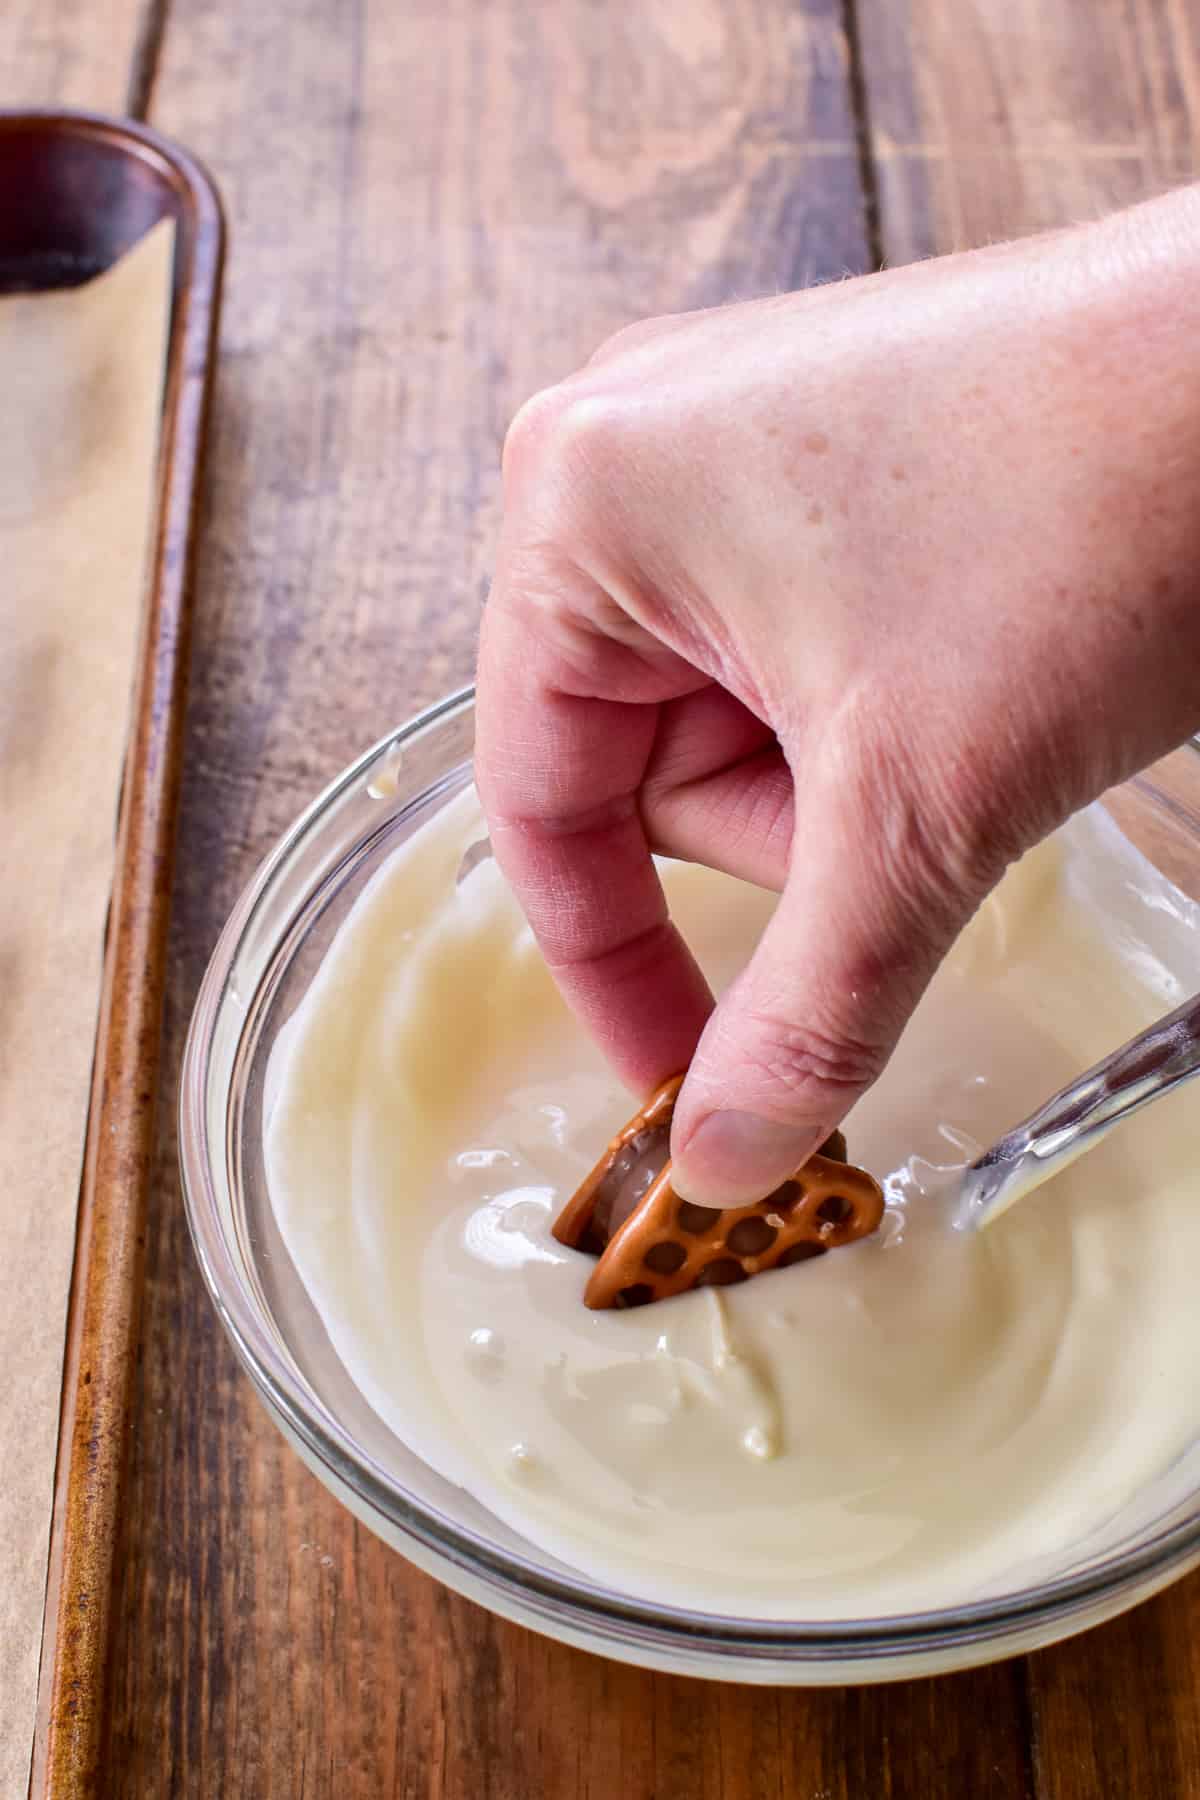 Dipping stuffed pretzels into melted white chocolate